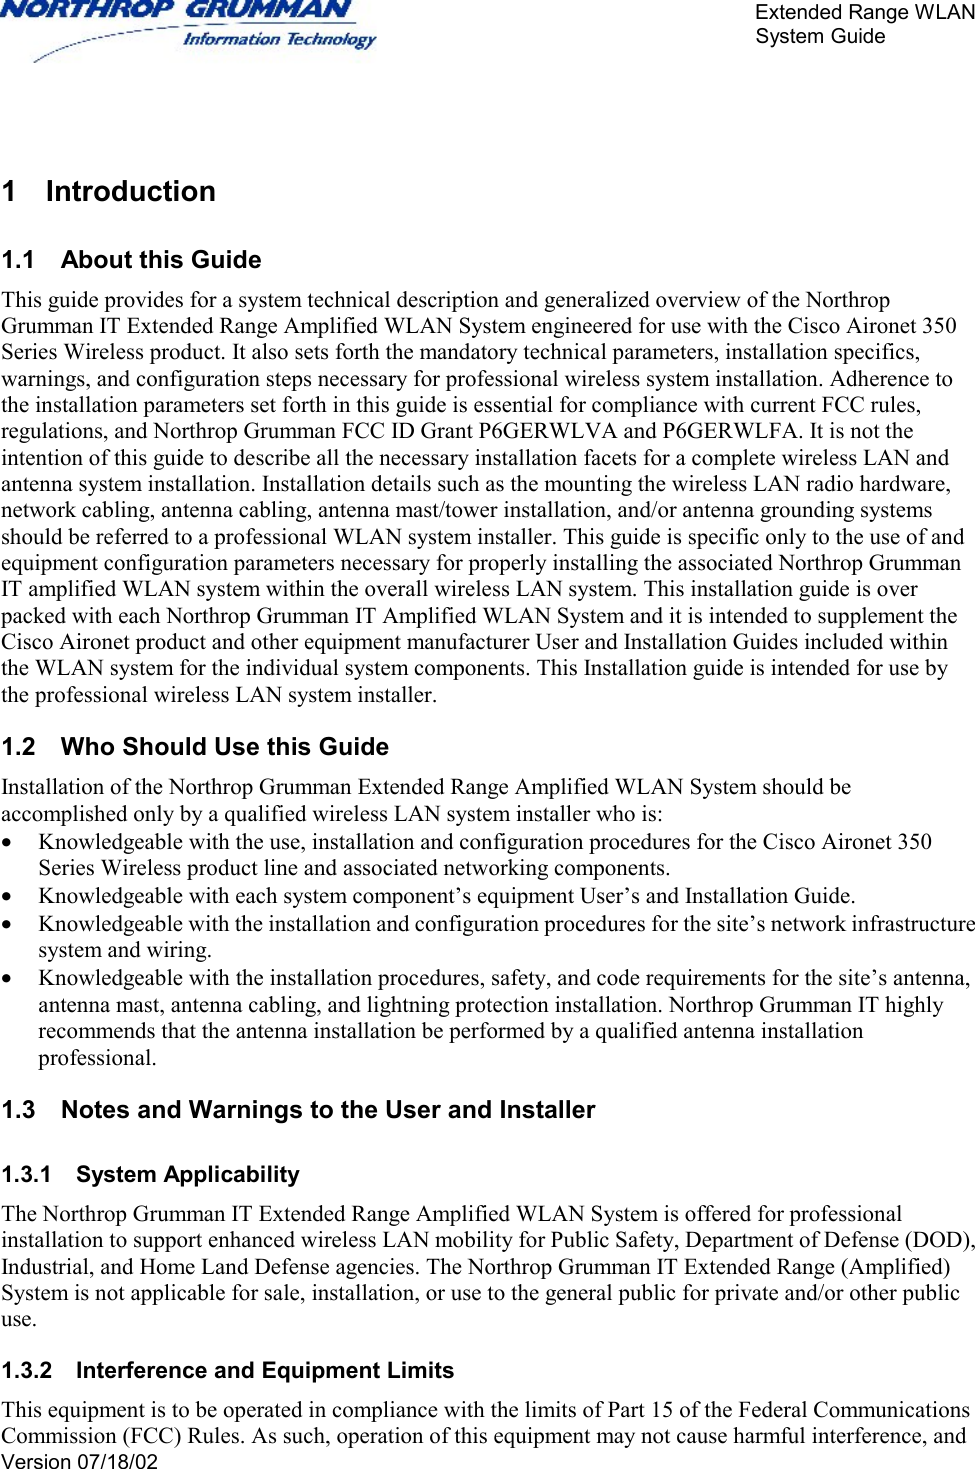       Extended Range WLAN                                                     System Guide     Version 07/18/02    1 Introduction 1.1  About this Guide This guide provides for a system technical description and generalized overview of the Northrop Grumman IT Extended Range Amplified WLAN System engineered for use with the Cisco Aironet 350 Series Wireless product. It also sets forth the mandatory technical parameters, installation specifics, warnings, and configuration steps necessary for professional wireless system installation. Adherence to the installation parameters set forth in this guide is essential for compliance with current FCC rules, regulations, and Northrop Grumman FCC ID Grant P6GERWLVA and P6GERWLFA. It is not the intention of this guide to describe all the necessary installation facets for a complete wireless LAN and antenna system installation. Installation details such as the mounting the wireless LAN radio hardware, network cabling, antenna cabling, antenna mast/tower installation, and/or antenna grounding systems should be referred to a professional WLAN system installer. This guide is specific only to the use of and equipment configuration parameters necessary for properly installing the associated Northrop Grumman IT amplified WLAN system within the overall wireless LAN system. This installation guide is over packed with each Northrop Grumman IT Amplified WLAN System and it is intended to supplement the Cisco Aironet product and other equipment manufacturer User and Installation Guides included within the WLAN system for the individual system components. This Installation guide is intended for use by the professional wireless LAN system installer.  1.2  Who Should Use this Guide Installation of the Northrop Grumman Extended Range Amplified WLAN System should be accomplished only by a qualified wireless LAN system installer who is: •  Knowledgeable with the use, installation and configuration procedures for the Cisco Aironet 350 Series Wireless product line and associated networking components. •  Knowledgeable with each system component’s equipment User’s and Installation Guide.  •  Knowledgeable with the installation and configuration procedures for the site’s network infrastructure system and wiring. •  Knowledgeable with the installation procedures, safety, and code requirements for the site’s antenna, antenna mast, antenna cabling, and lightning protection installation. Northrop Grumman IT highly recommends that the antenna installation be performed by a qualified antenna installation professional. 1.3  Notes and Warnings to the User and Installer 1.3.1 System Applicability The Northrop Grumman IT Extended Range Amplified WLAN System is offered for professional installation to support enhanced wireless LAN mobility for Public Safety, Department of Defense (DOD), Industrial, and Home Land Defense agencies. The Northrop Grumman IT Extended Range (Amplified) System is not applicable for sale, installation, or use to the general public for private and/or other public use. 1.3.2  Interference and Equipment Limits This equipment is to be operated in compliance with the limits of Part 15 of the Federal Communications Commission (FCC) Rules. As such, operation of this equipment may not cause harmful interference, and 